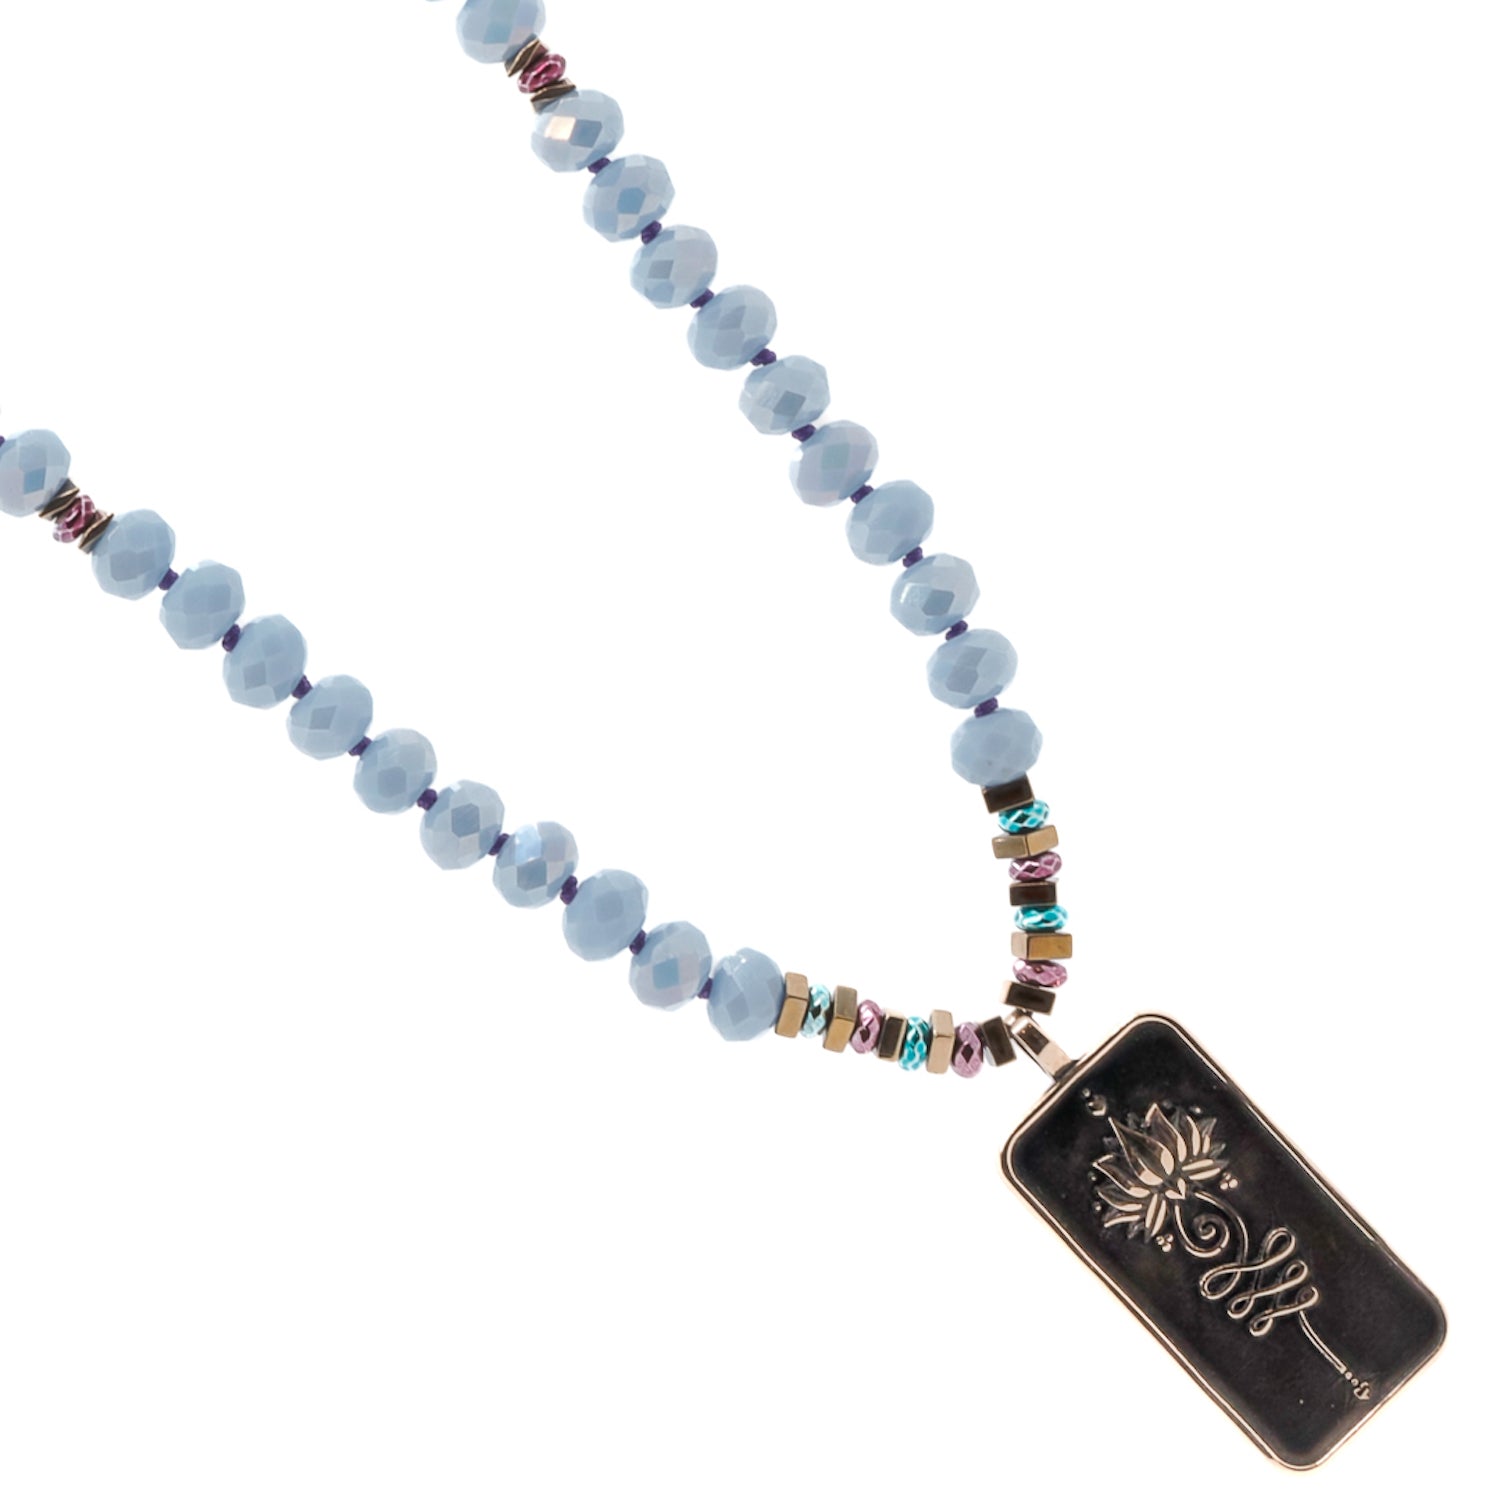 Love and Enlightenment - The Unalome Pendant Necklace Radiates Positive Energy and Meaning.